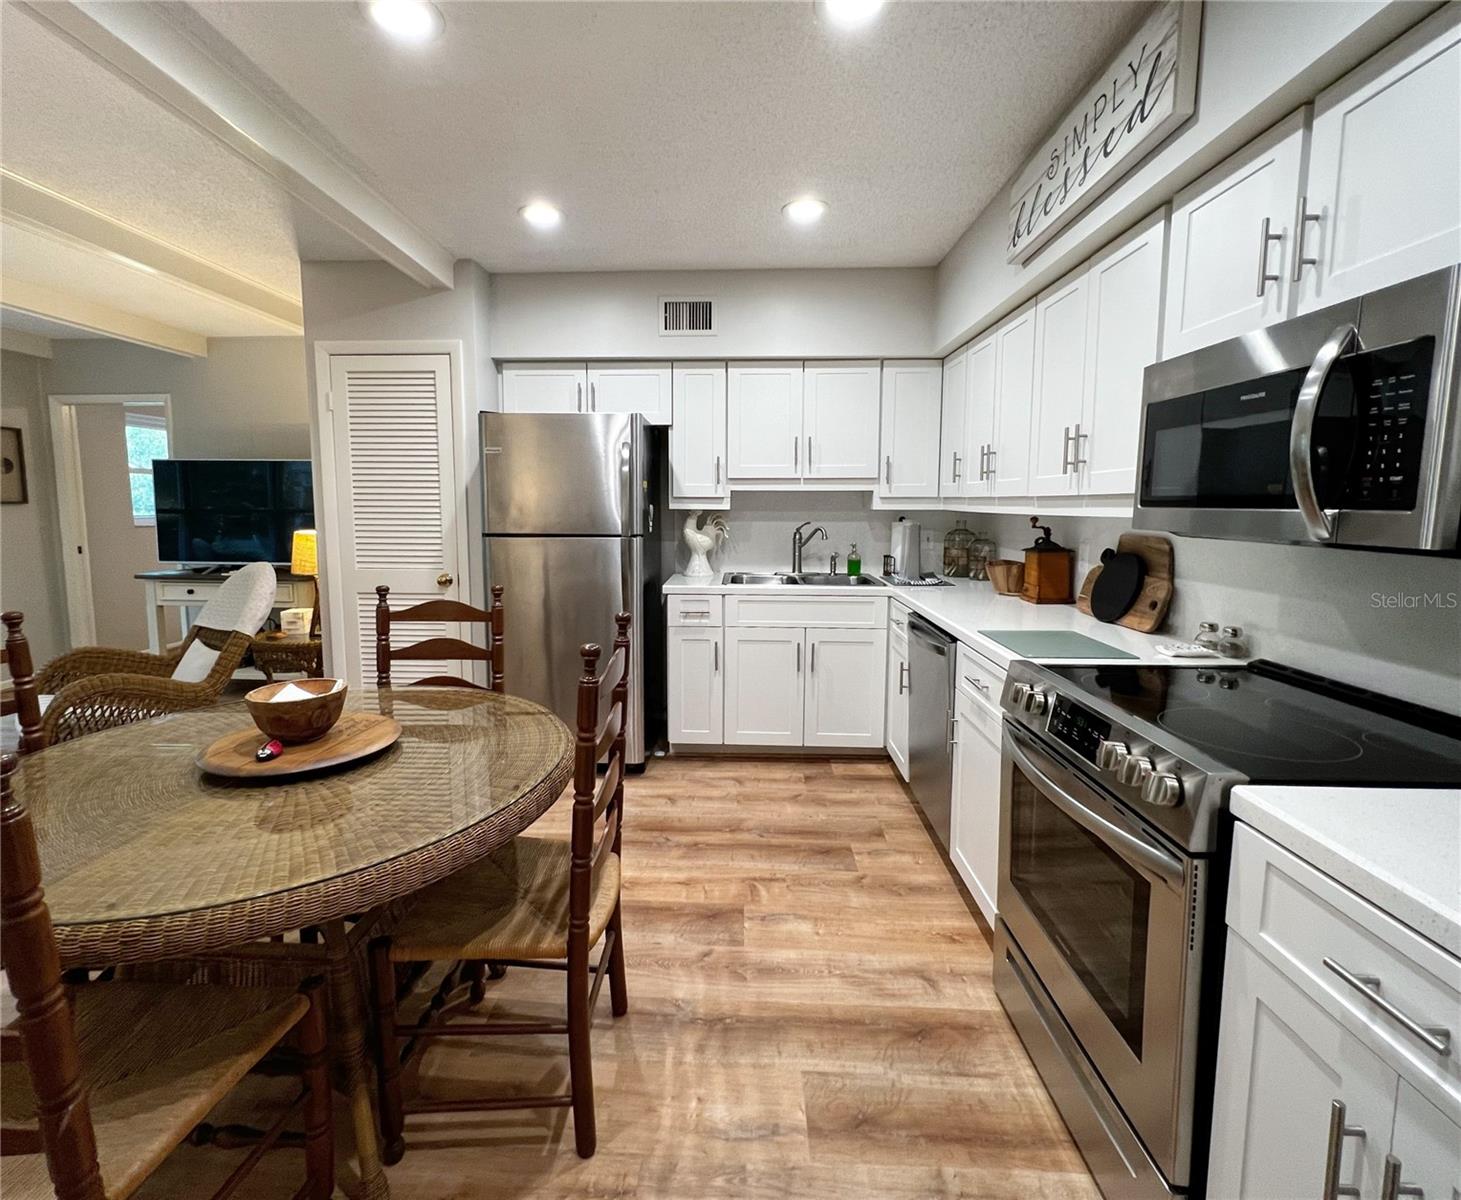 Remodeled kitchen with stainless steel appliances.